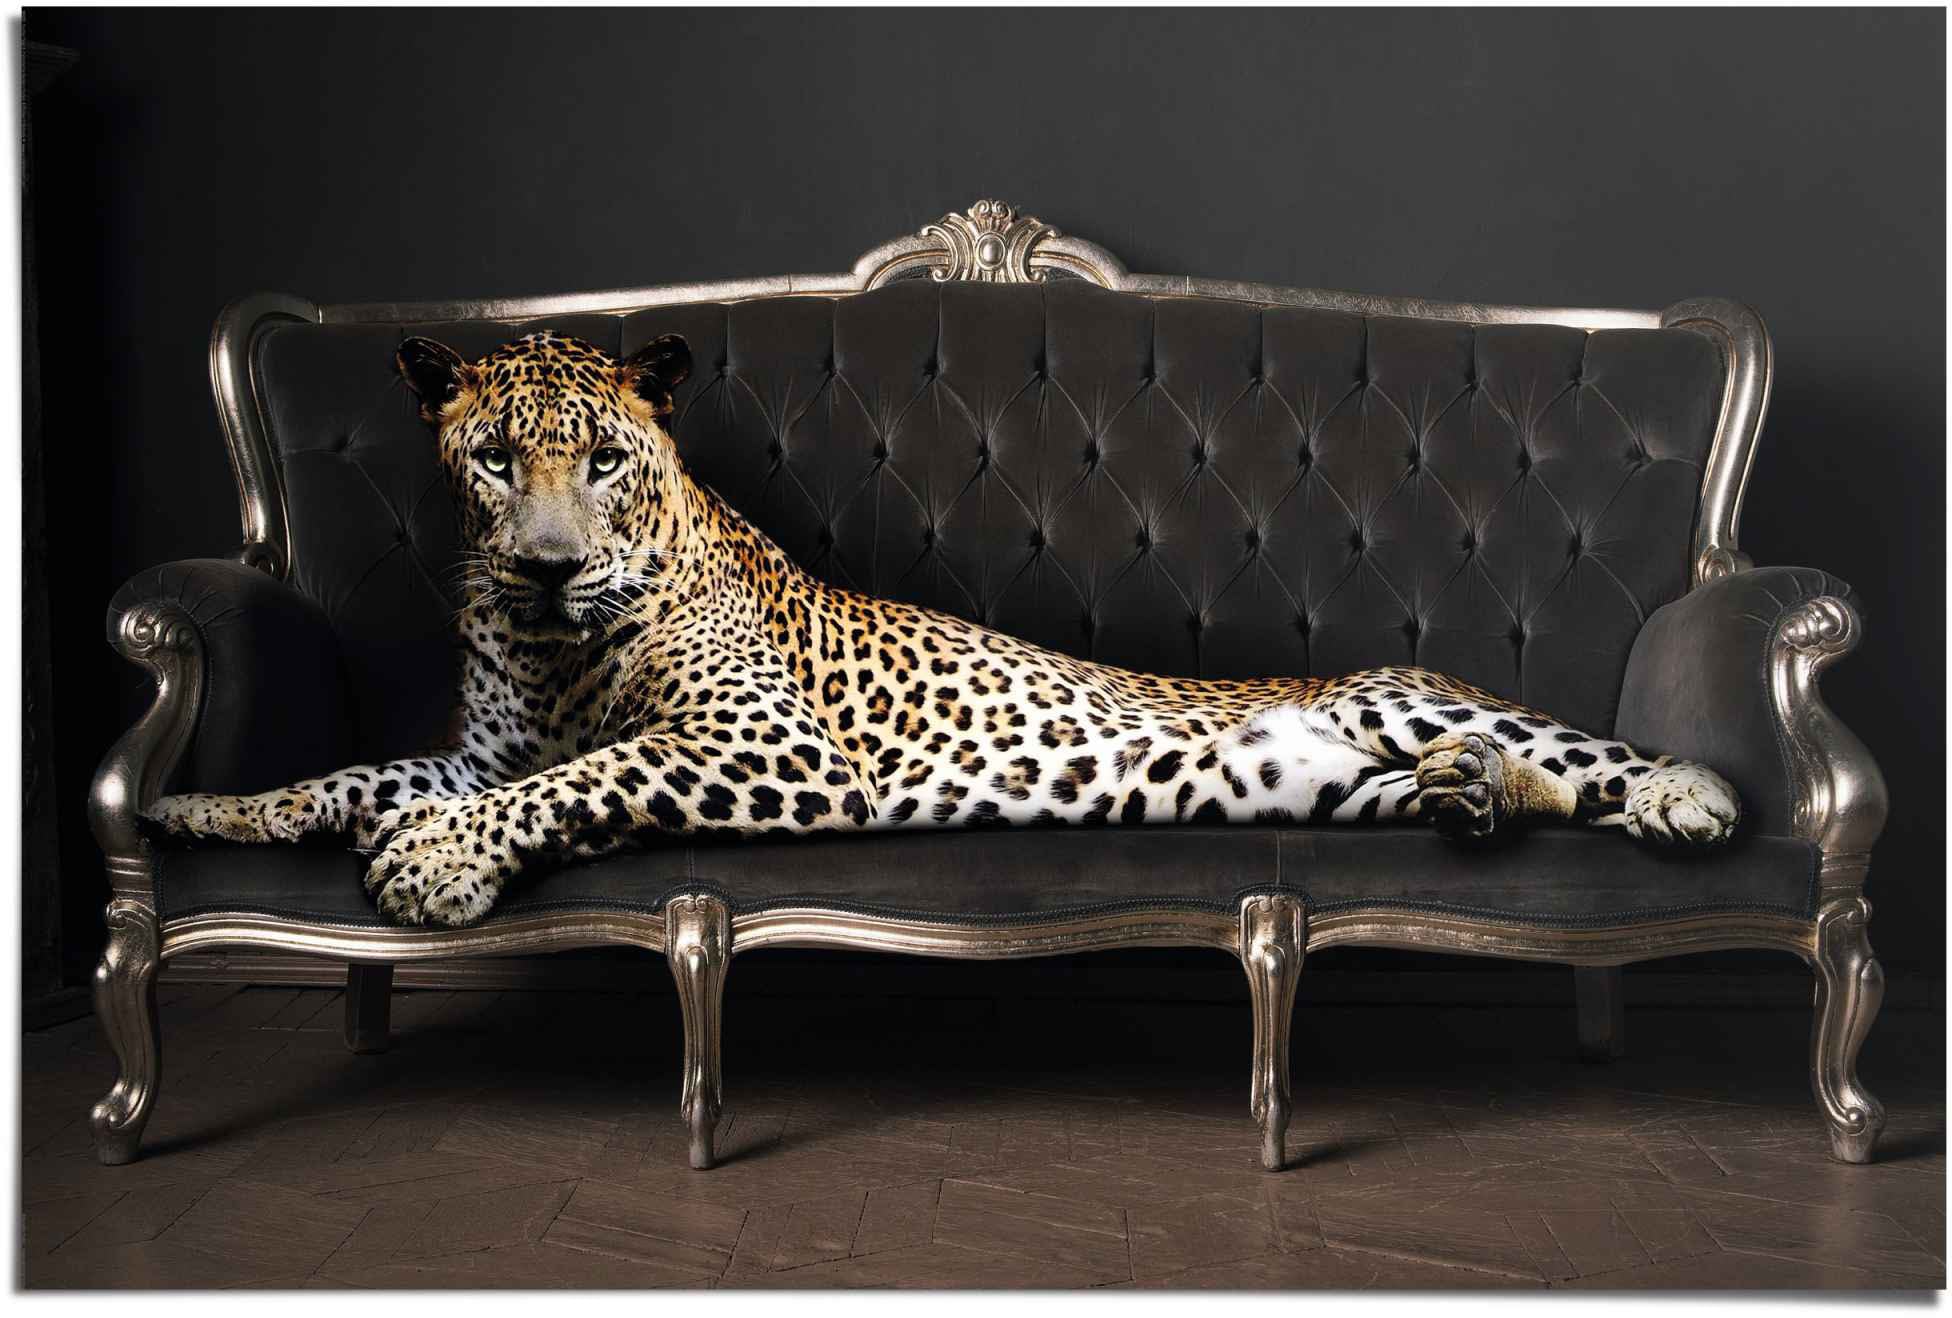 Liegend - Reinders! St.) Chic Relax«, Luxus - Panther bei Poster OTTO »Leopard (1 -